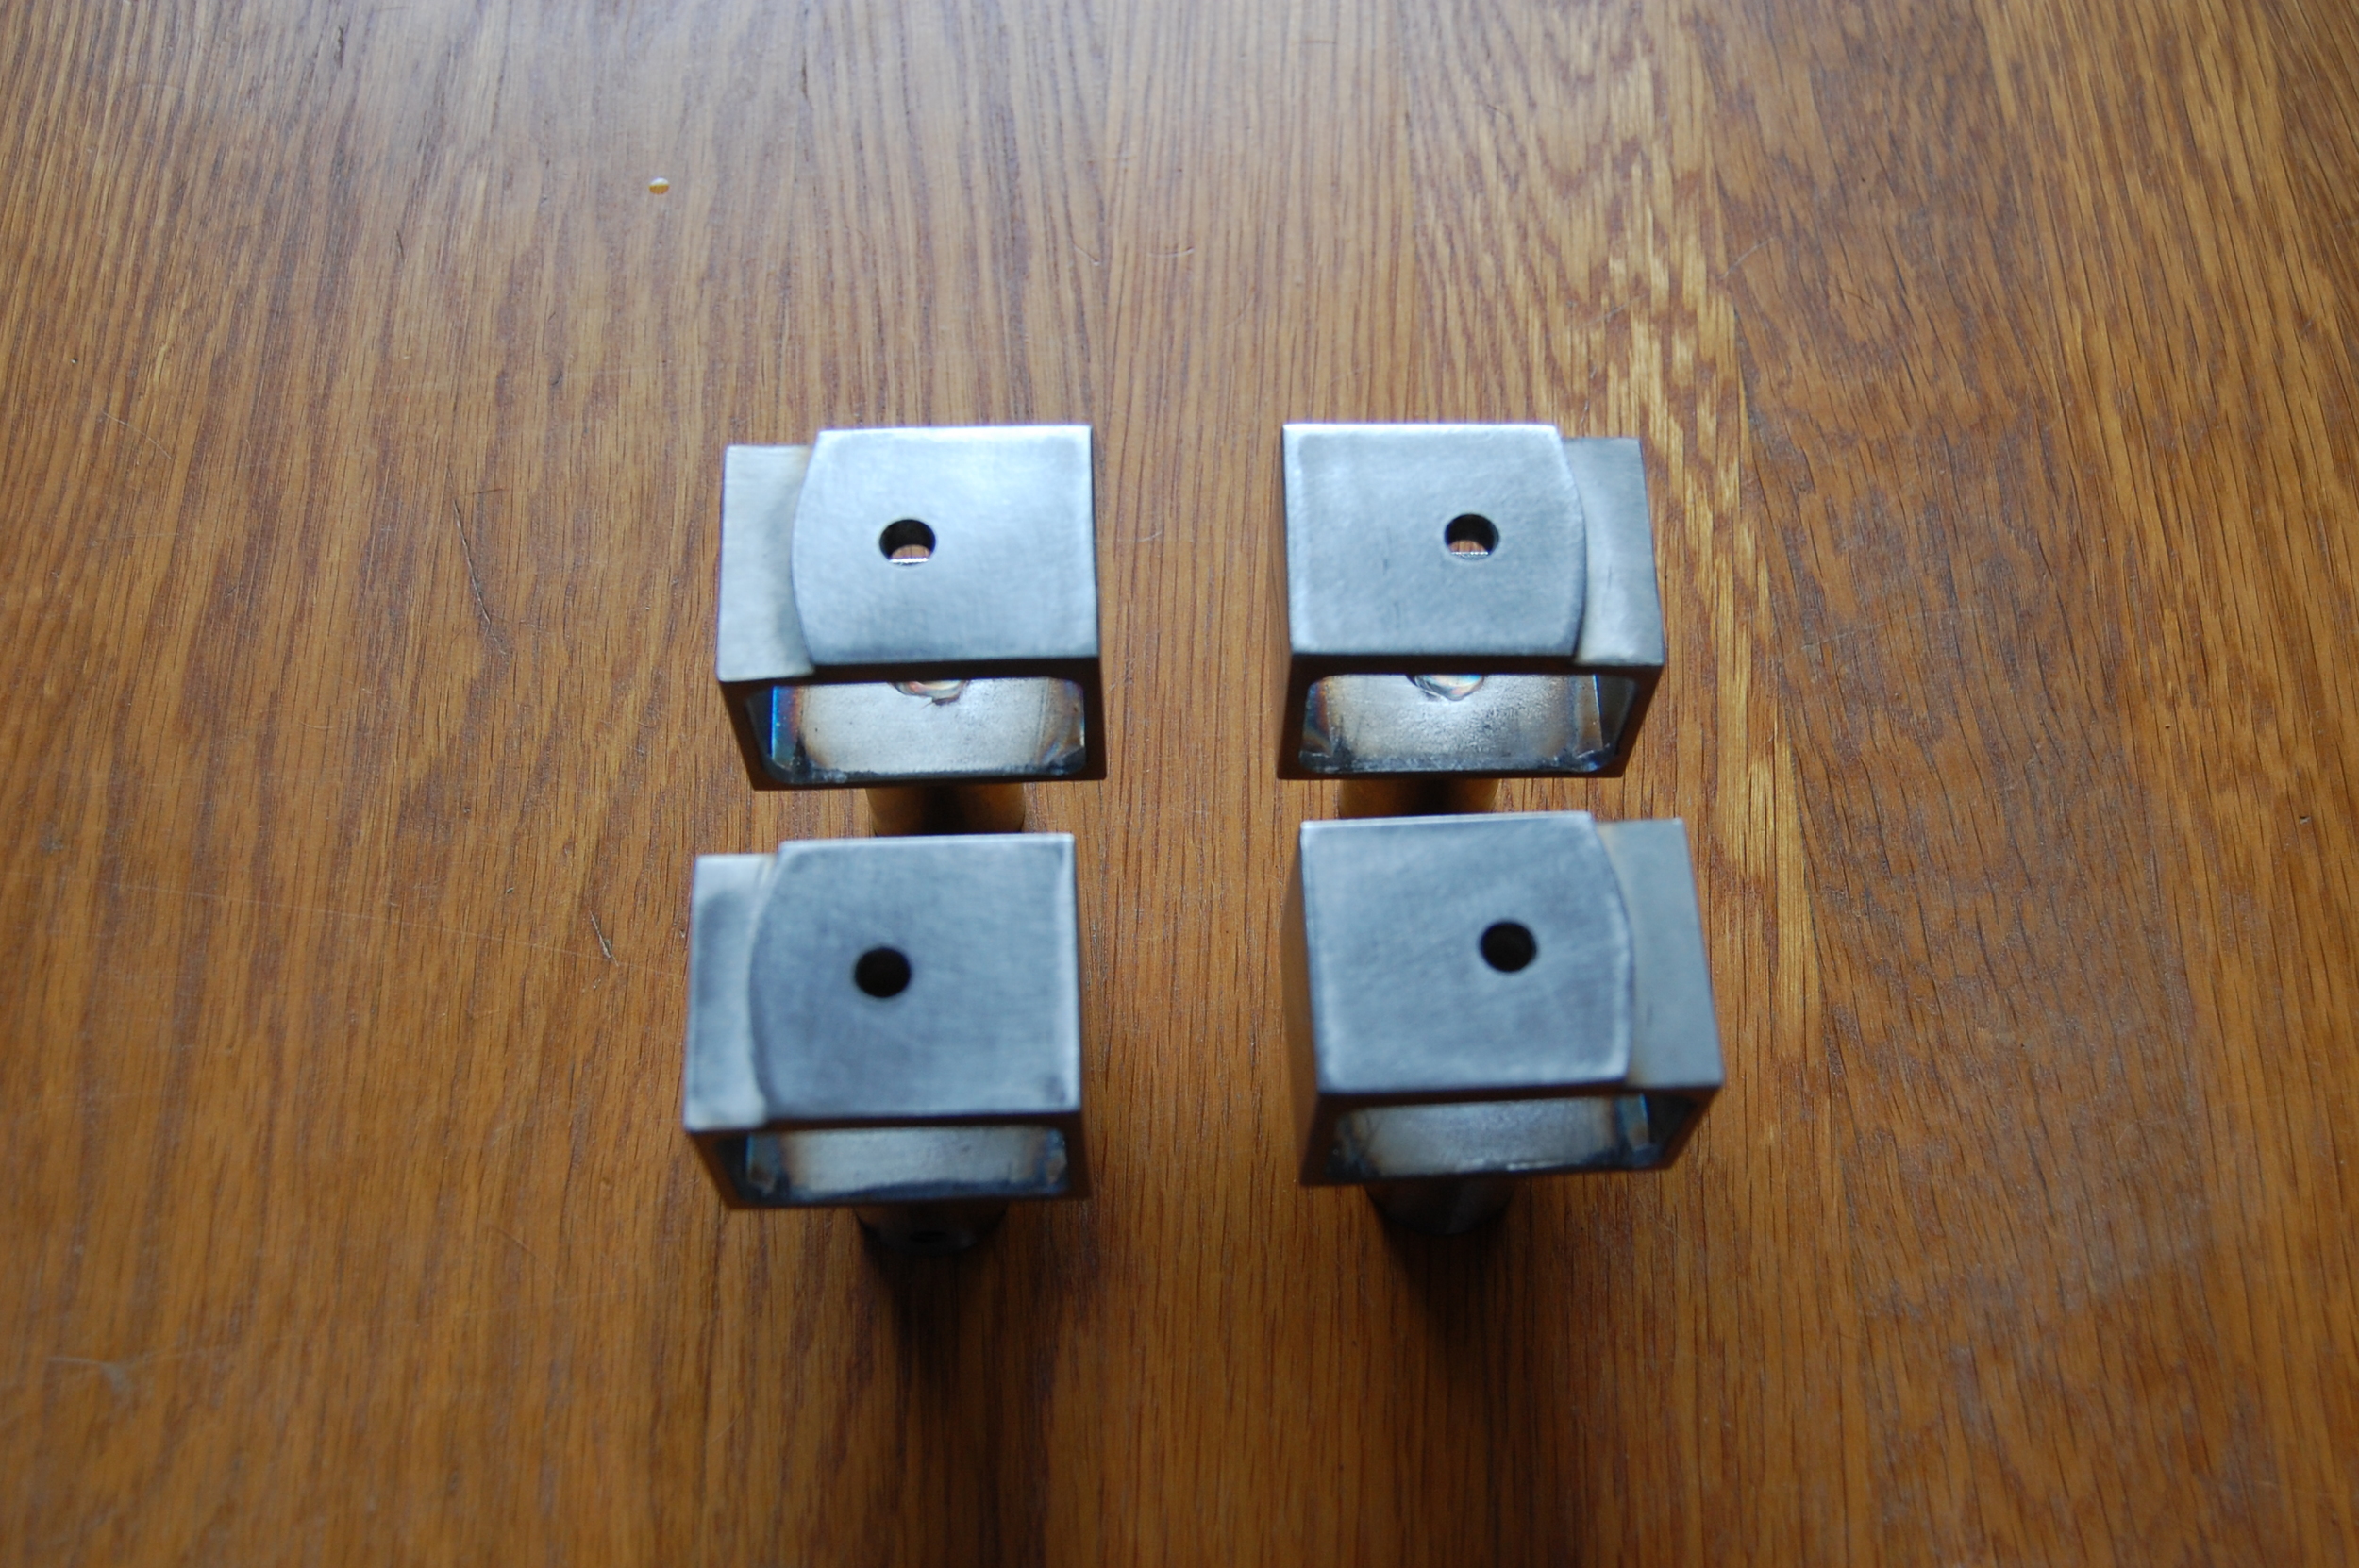  Stainless steel door handle standoffs.  Designed by Group Jake Collaborative 